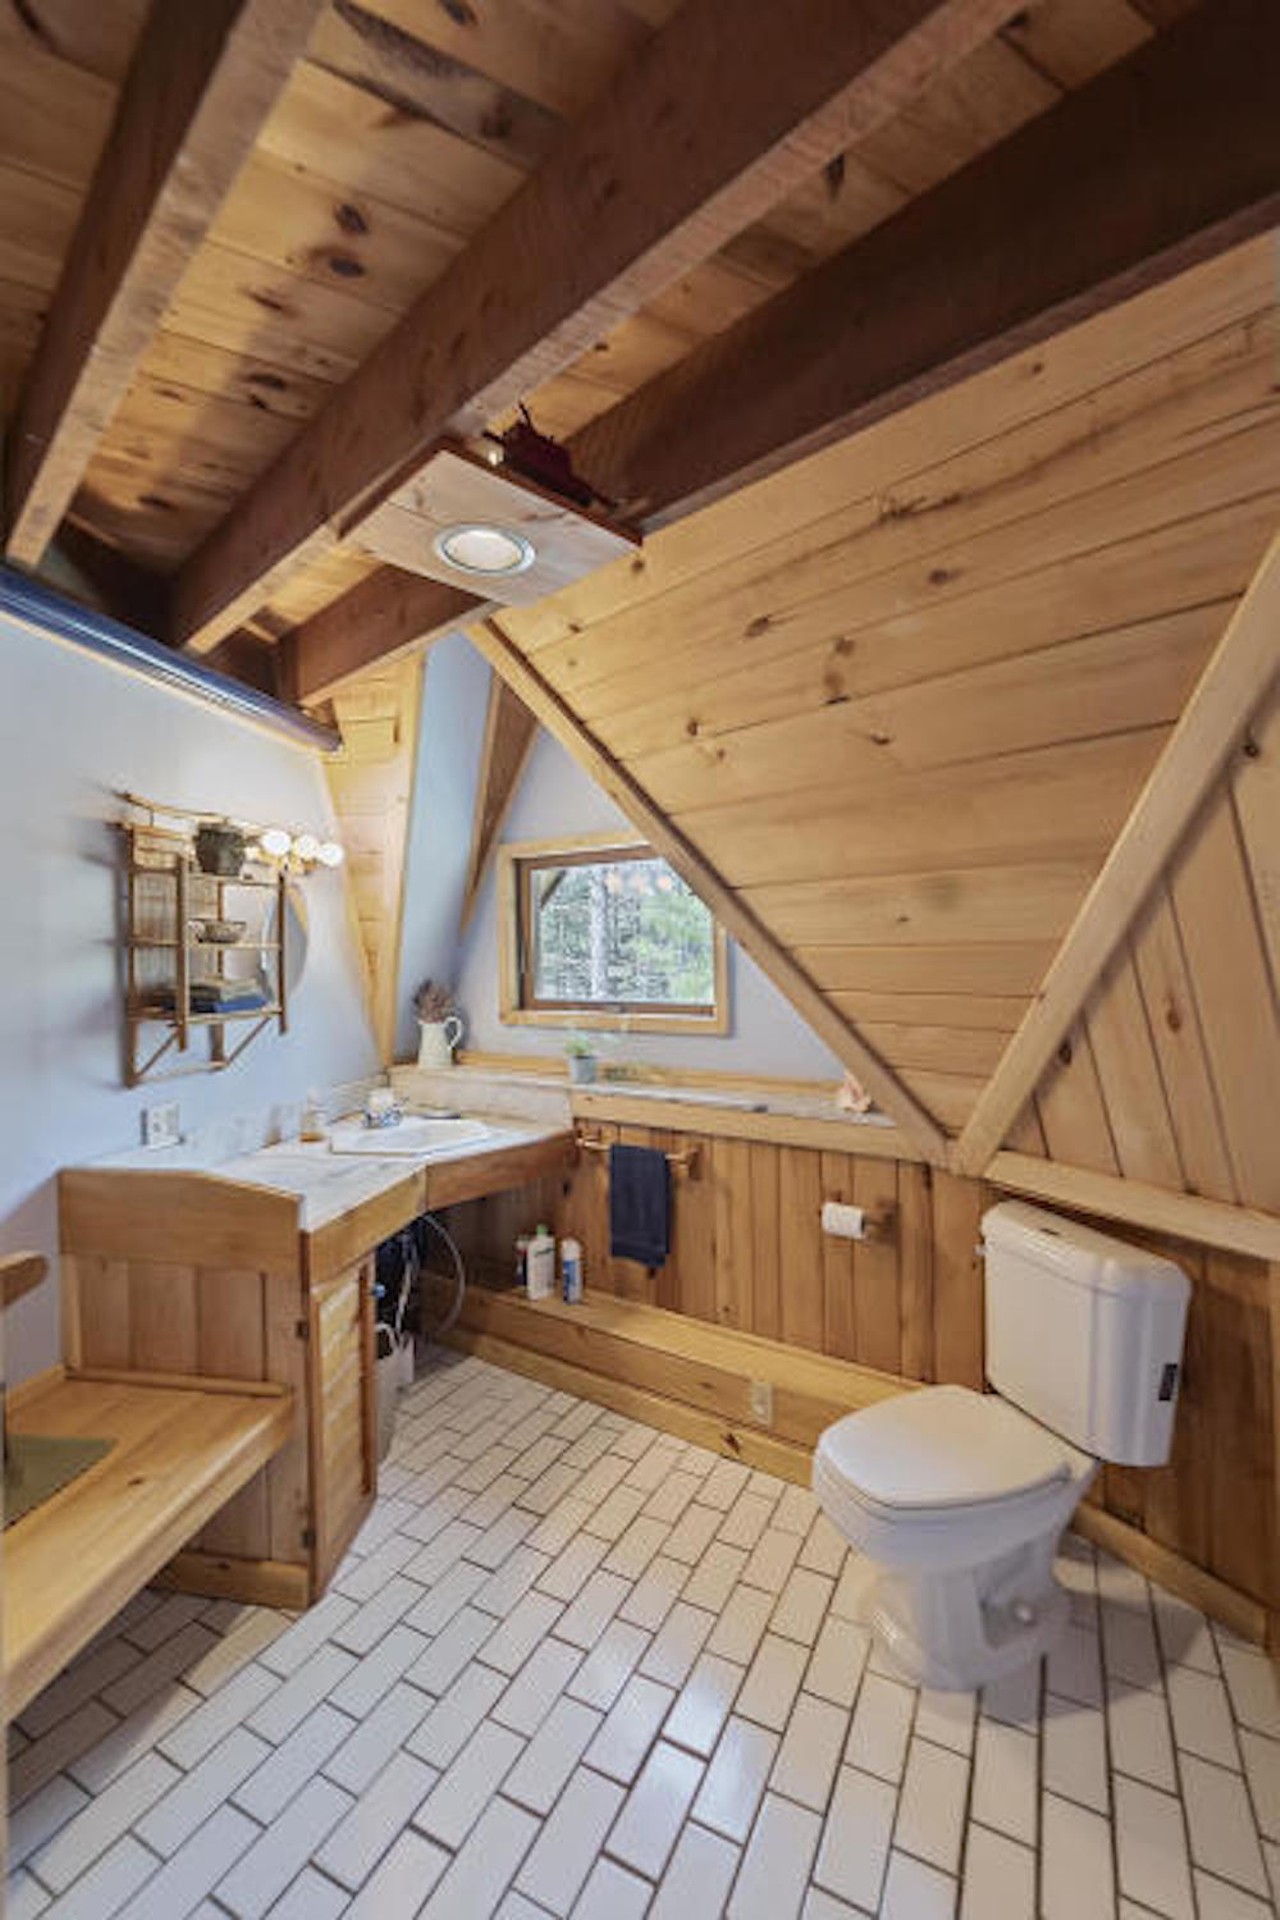 This whimsical $209k Upper Peninsula dome home is fit for Hagrid or Hobbits &#151;&nbsp;let's take a tour